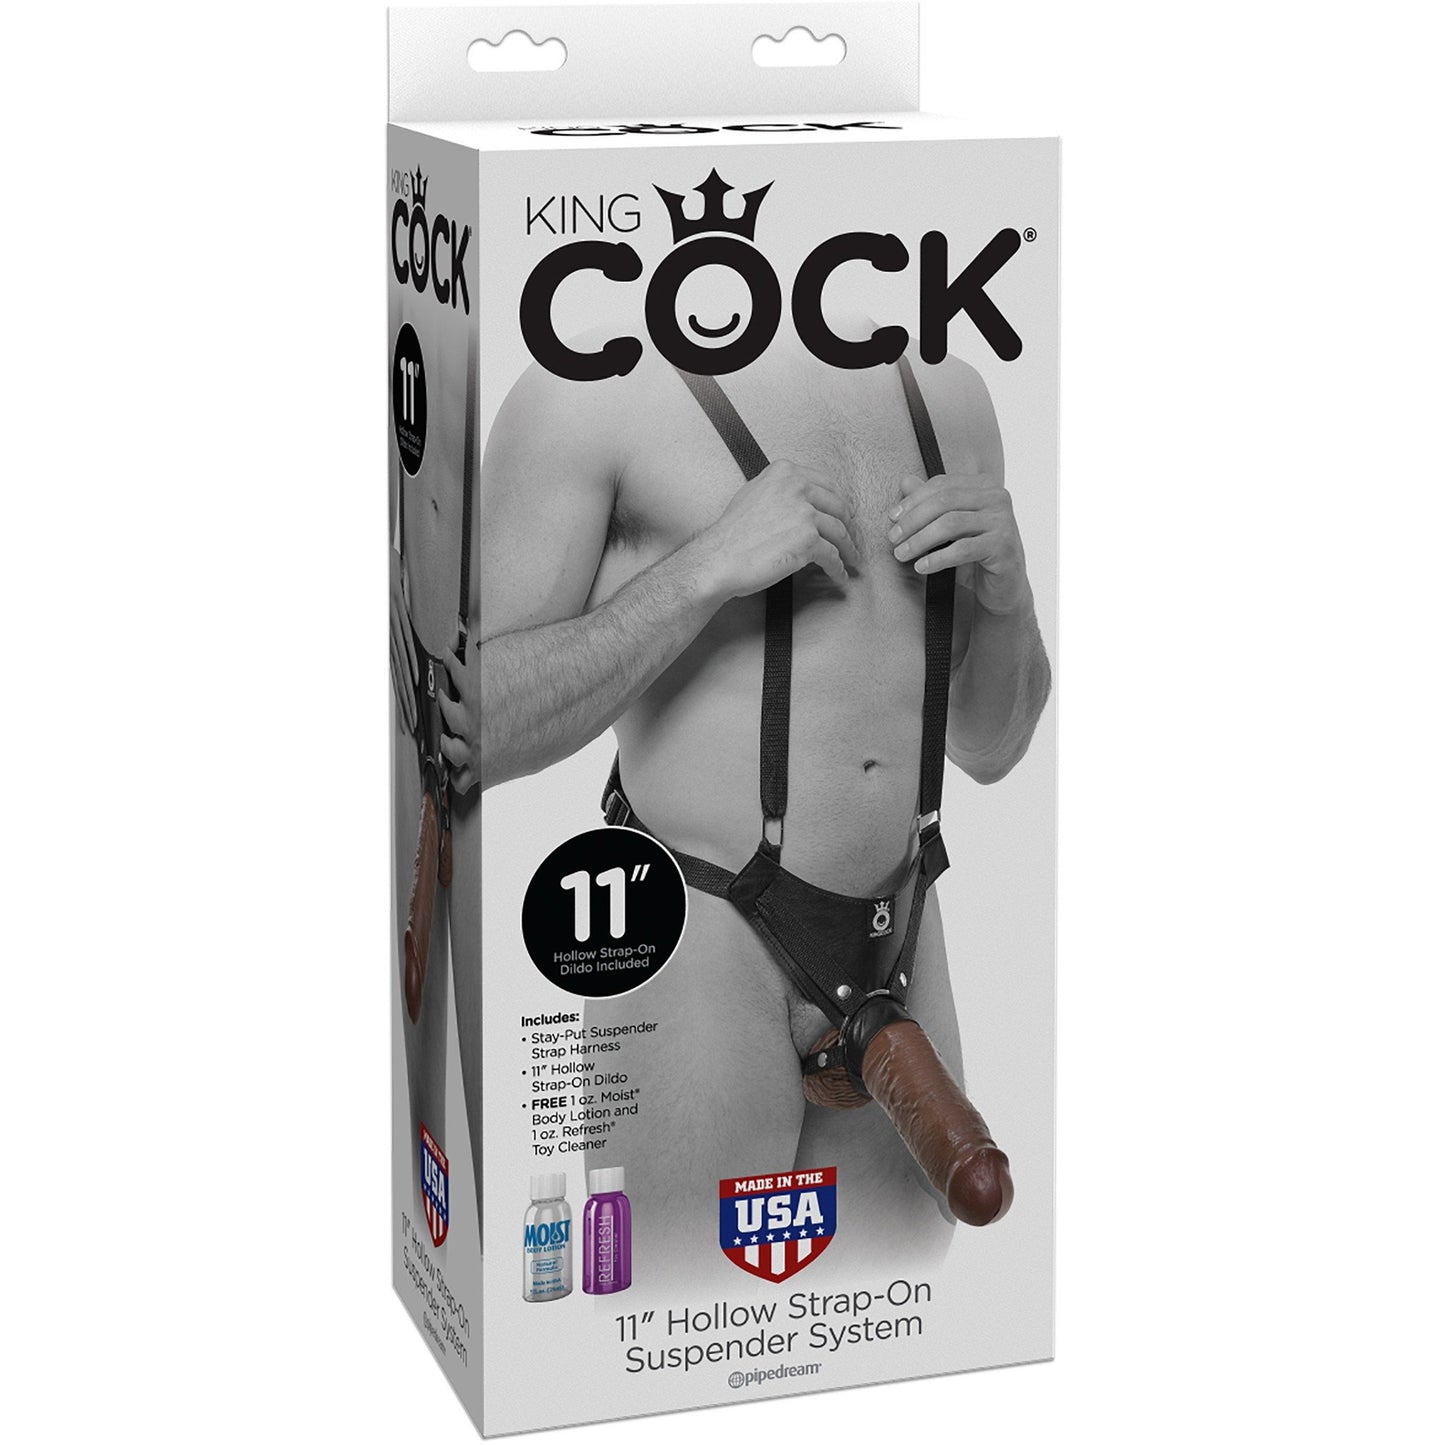 King Cock 11" Hollow Strap On Dildo with Suspender System